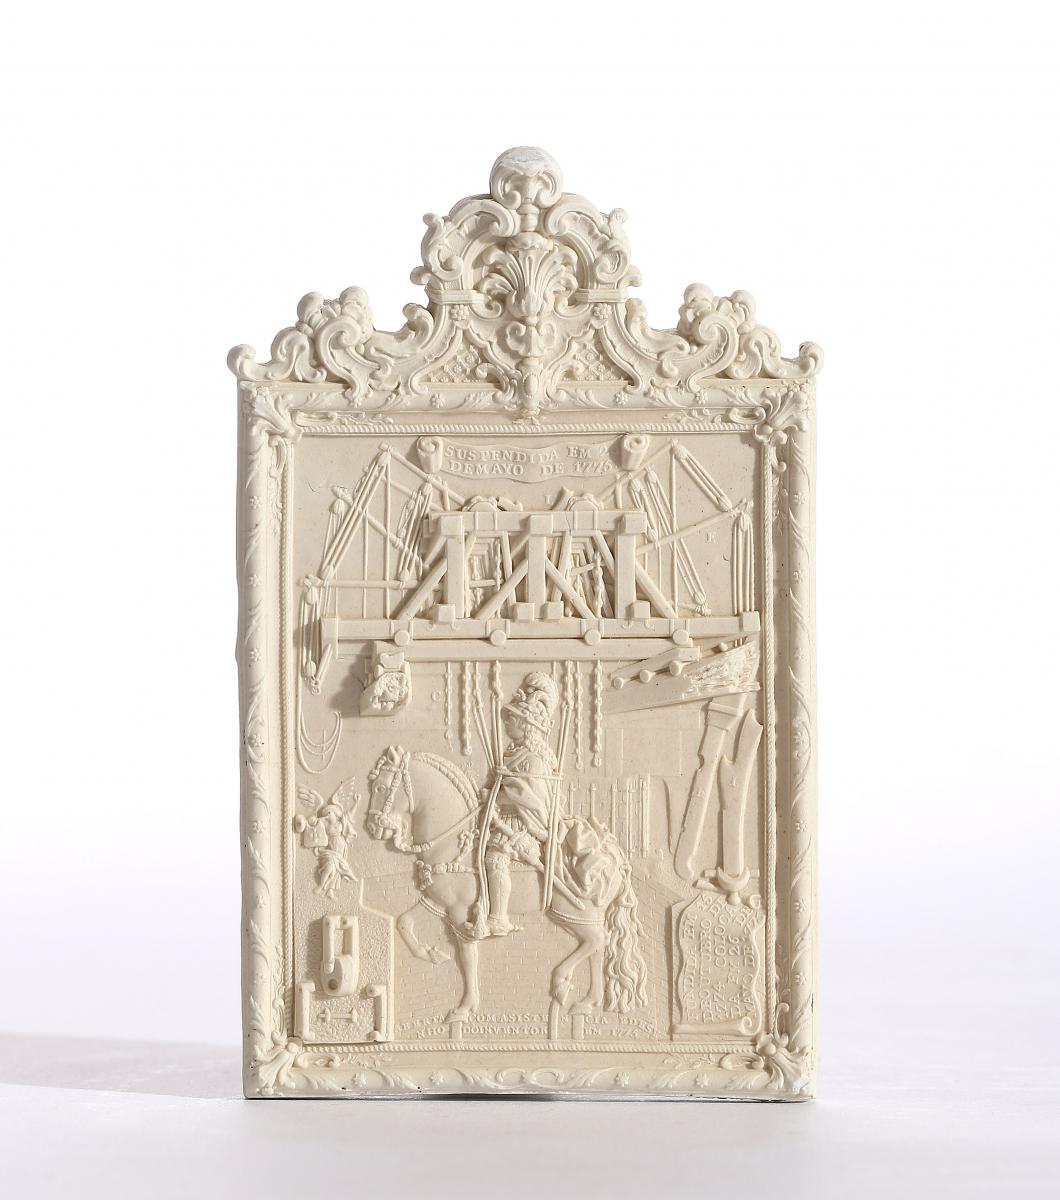 Biscuit Porcelain Plaque Commemorating the erection of the Equestrian Statue of King Jose I of Portugal